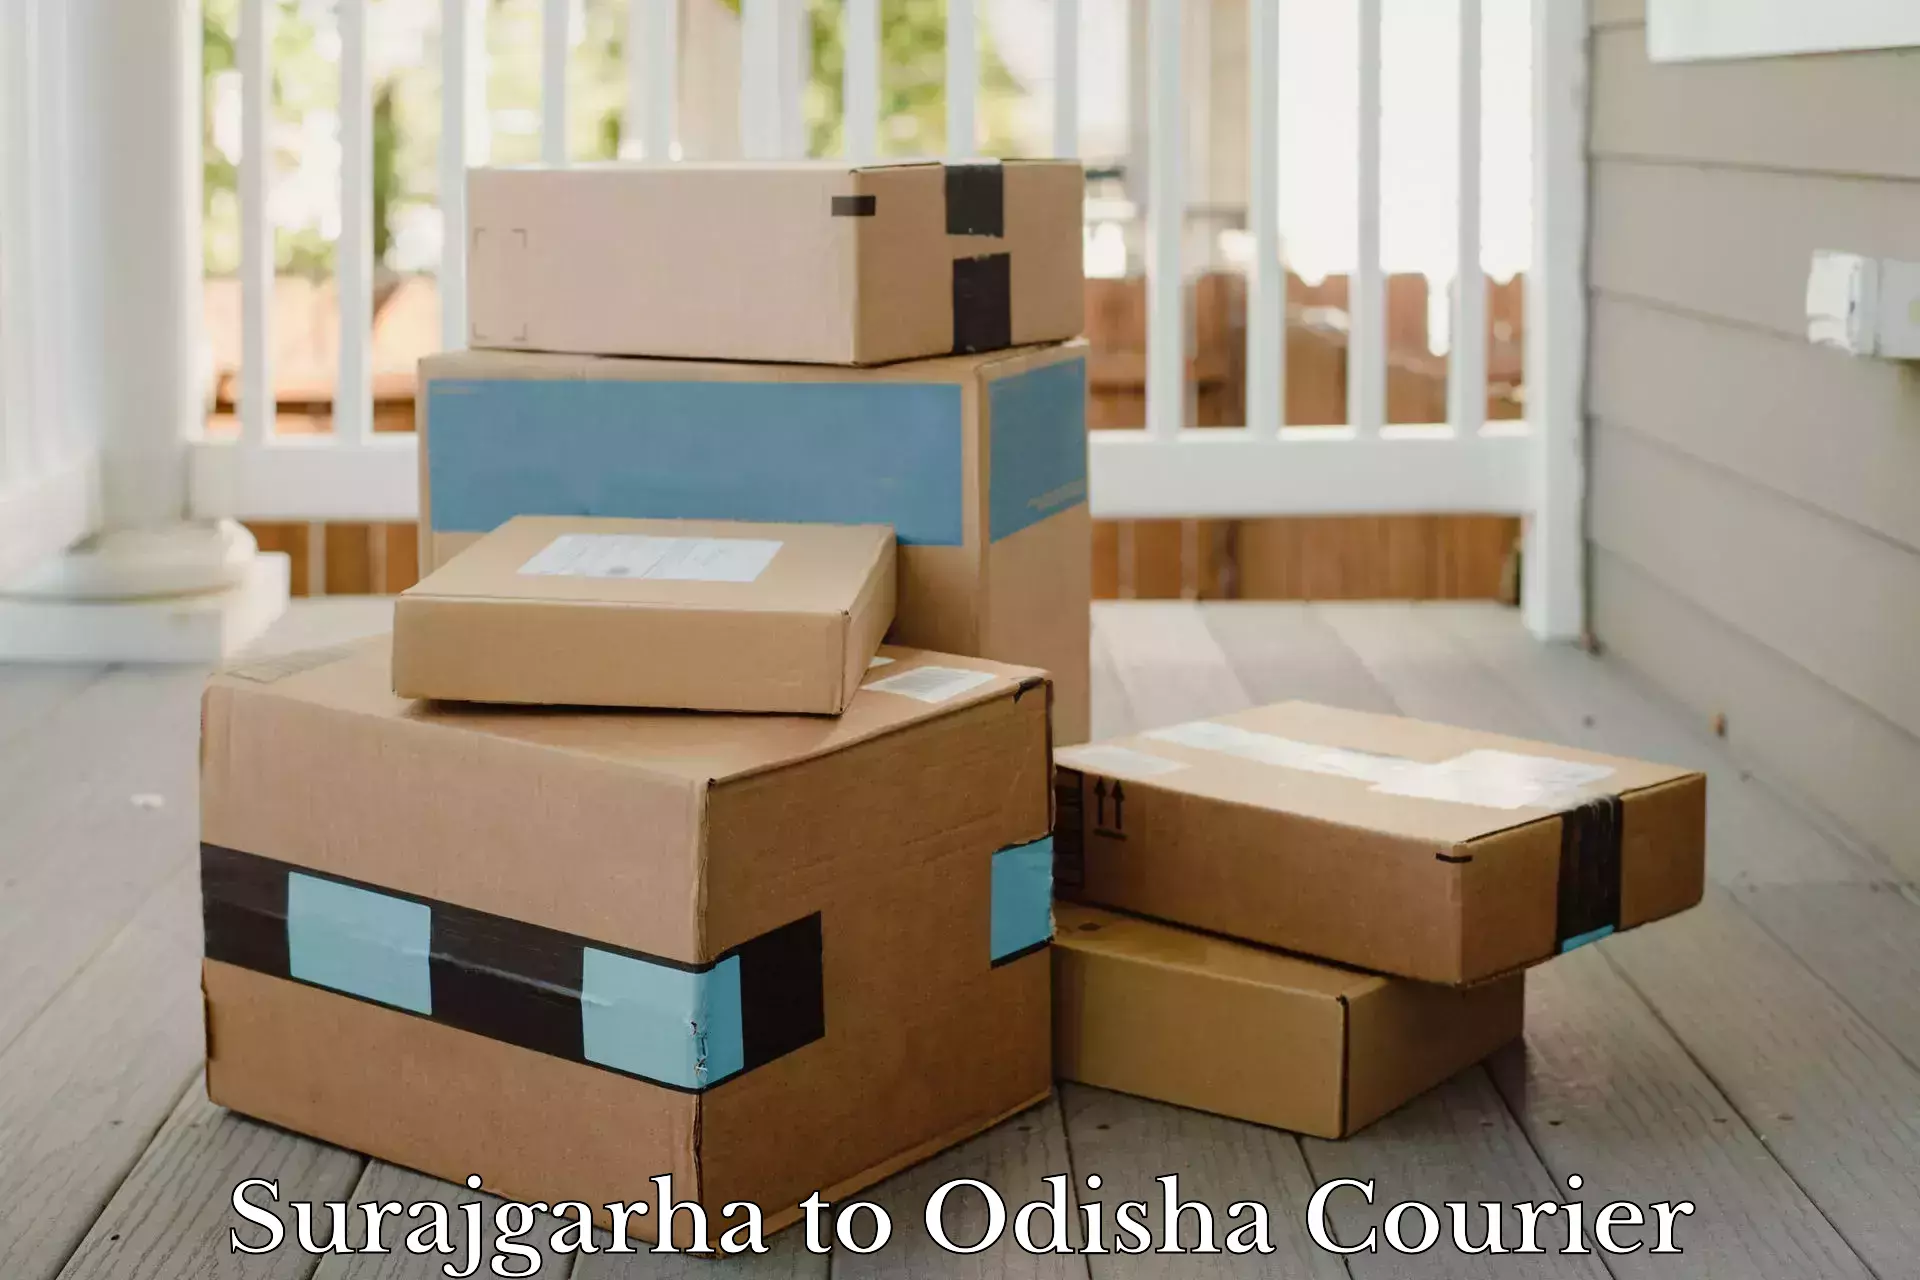 Flexible delivery schedules in Surajgarha to Ghatgaon